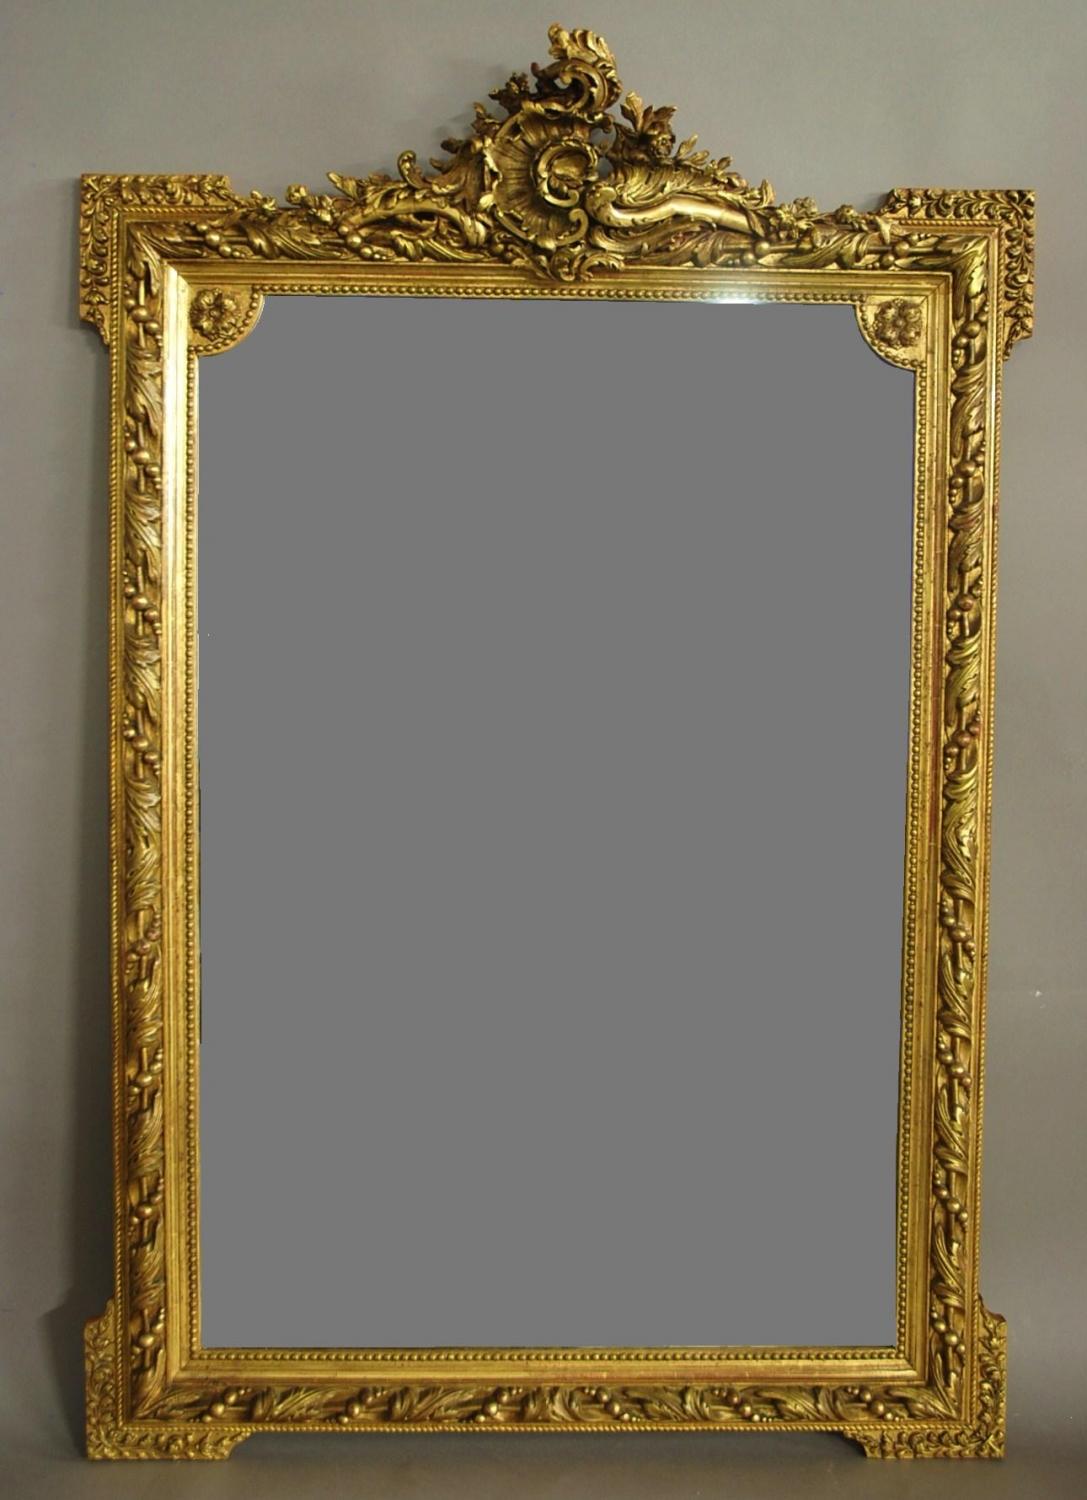 Large 19th century ornate French gilt mirror